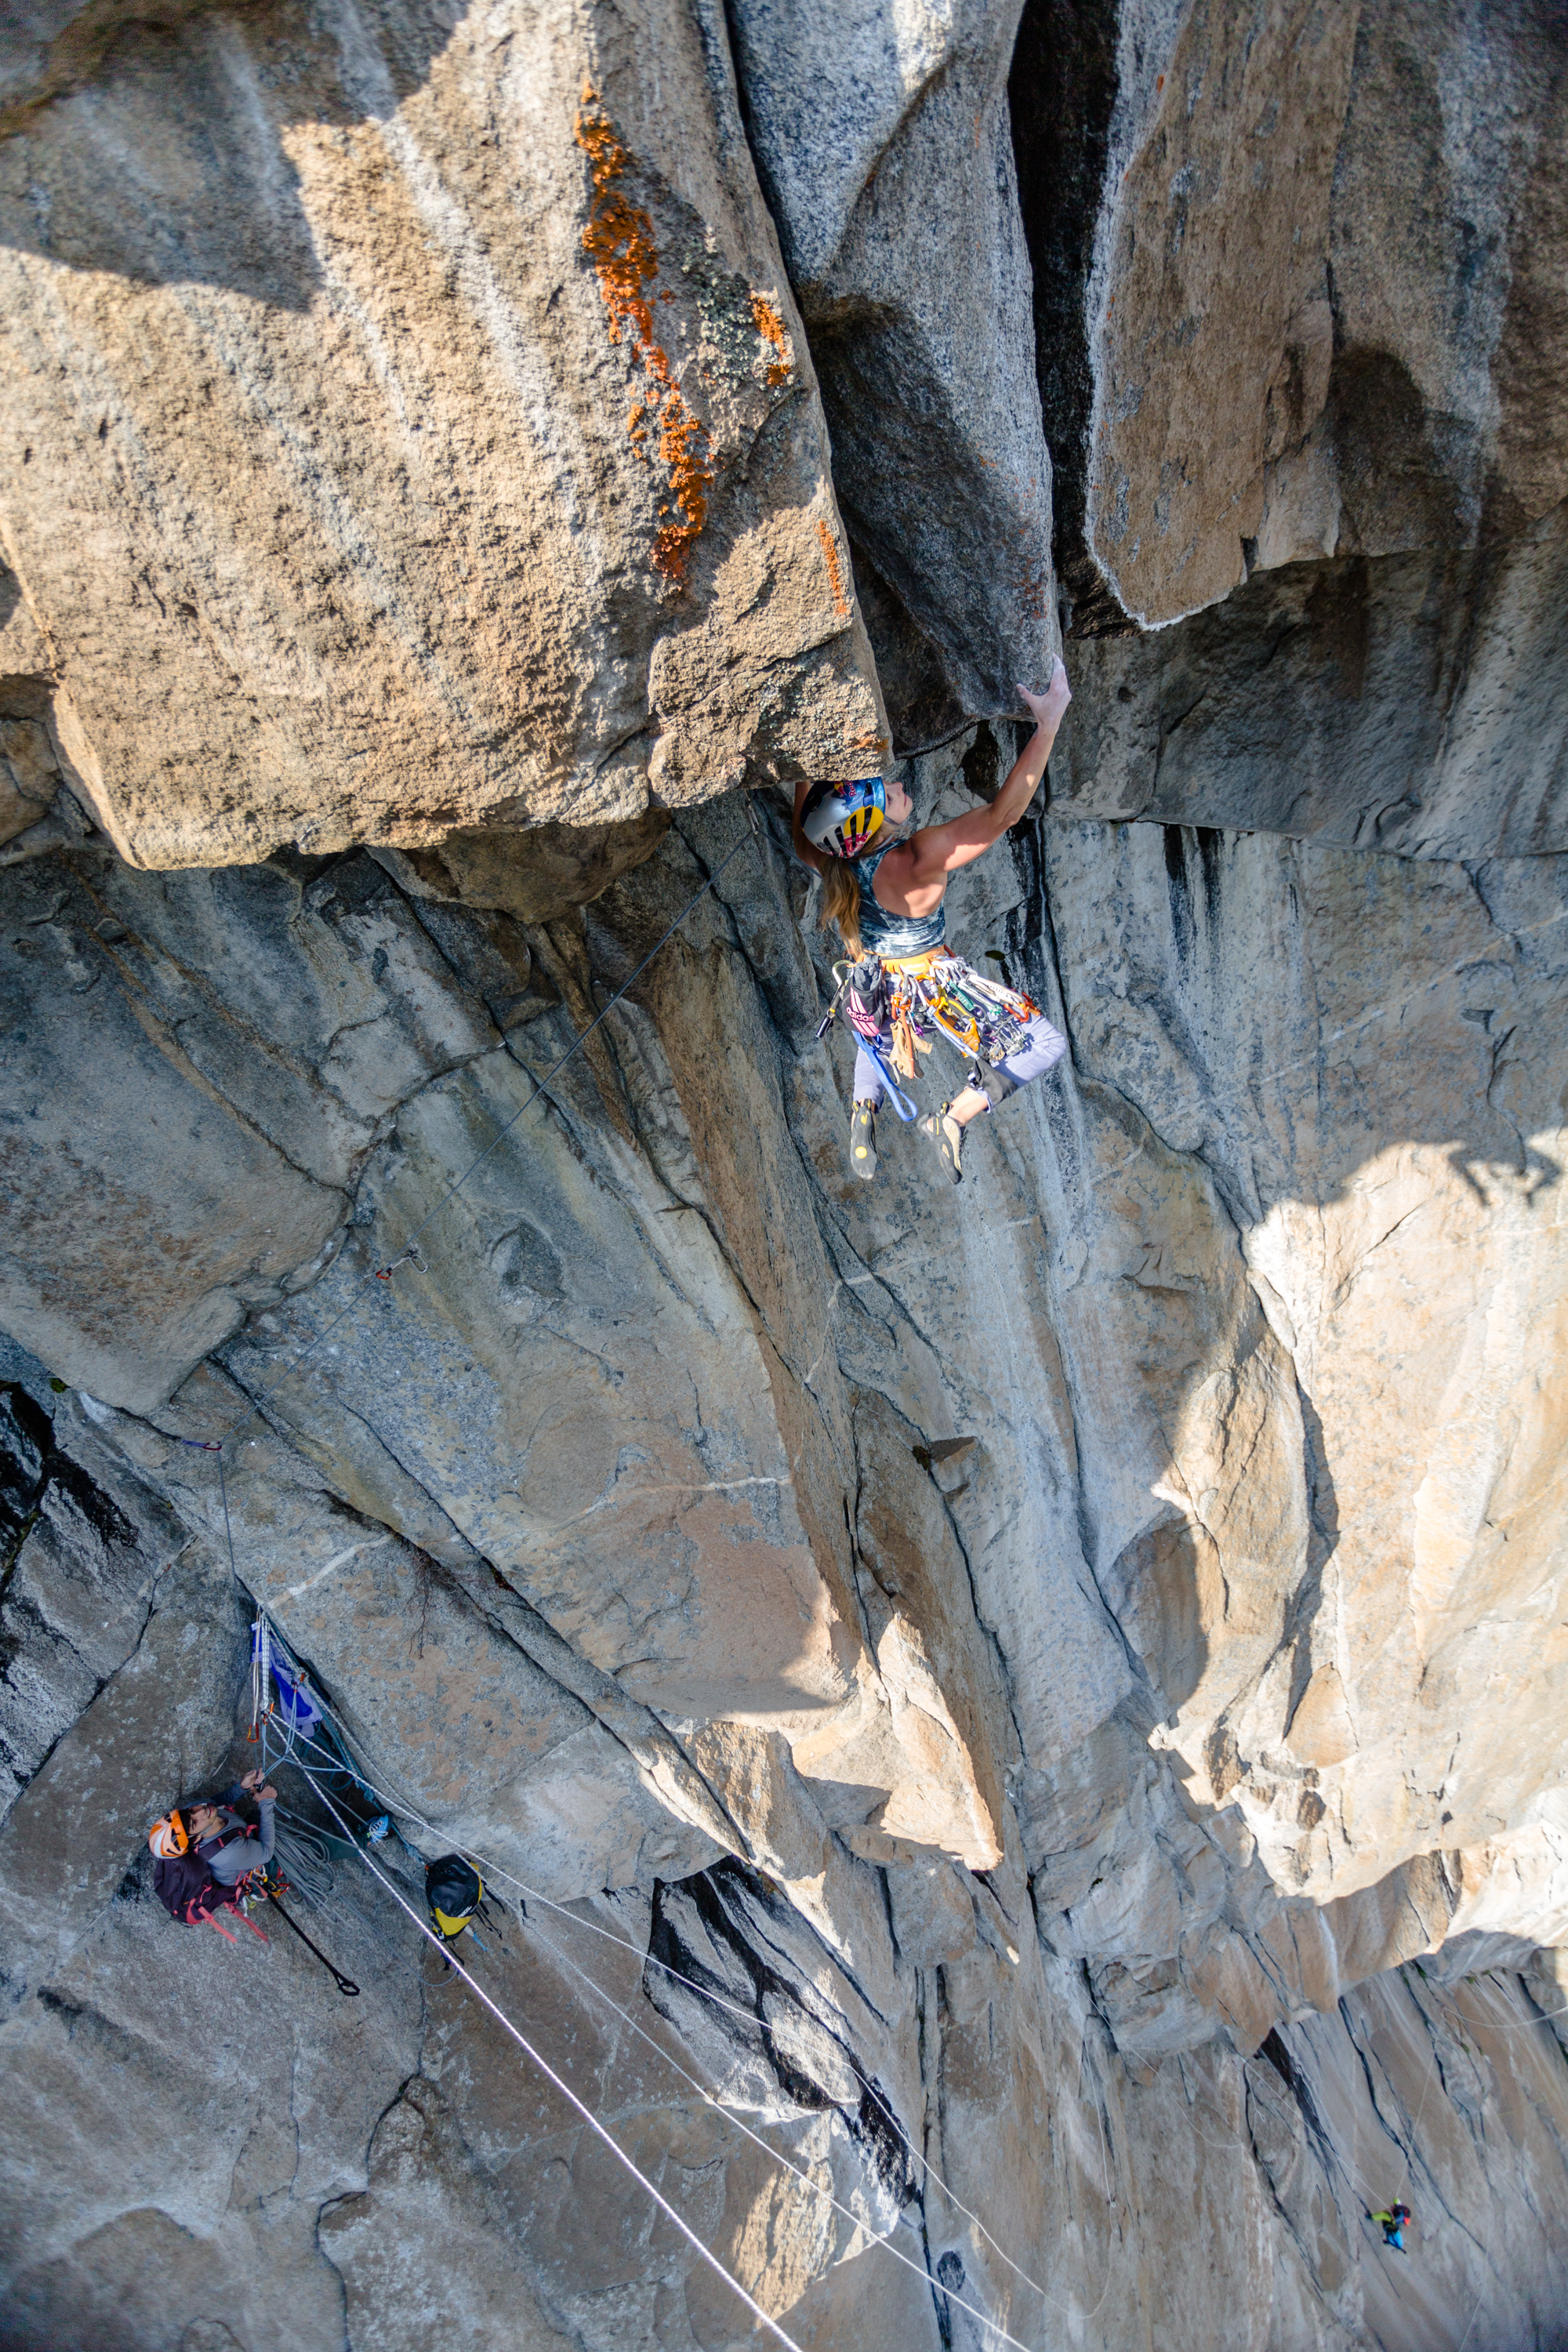 DiGiulian works the moves of the 5.13 roof crux on the Misty Wall before her free ascent with Cardwell, who is at the belay. [Photo] John Evans